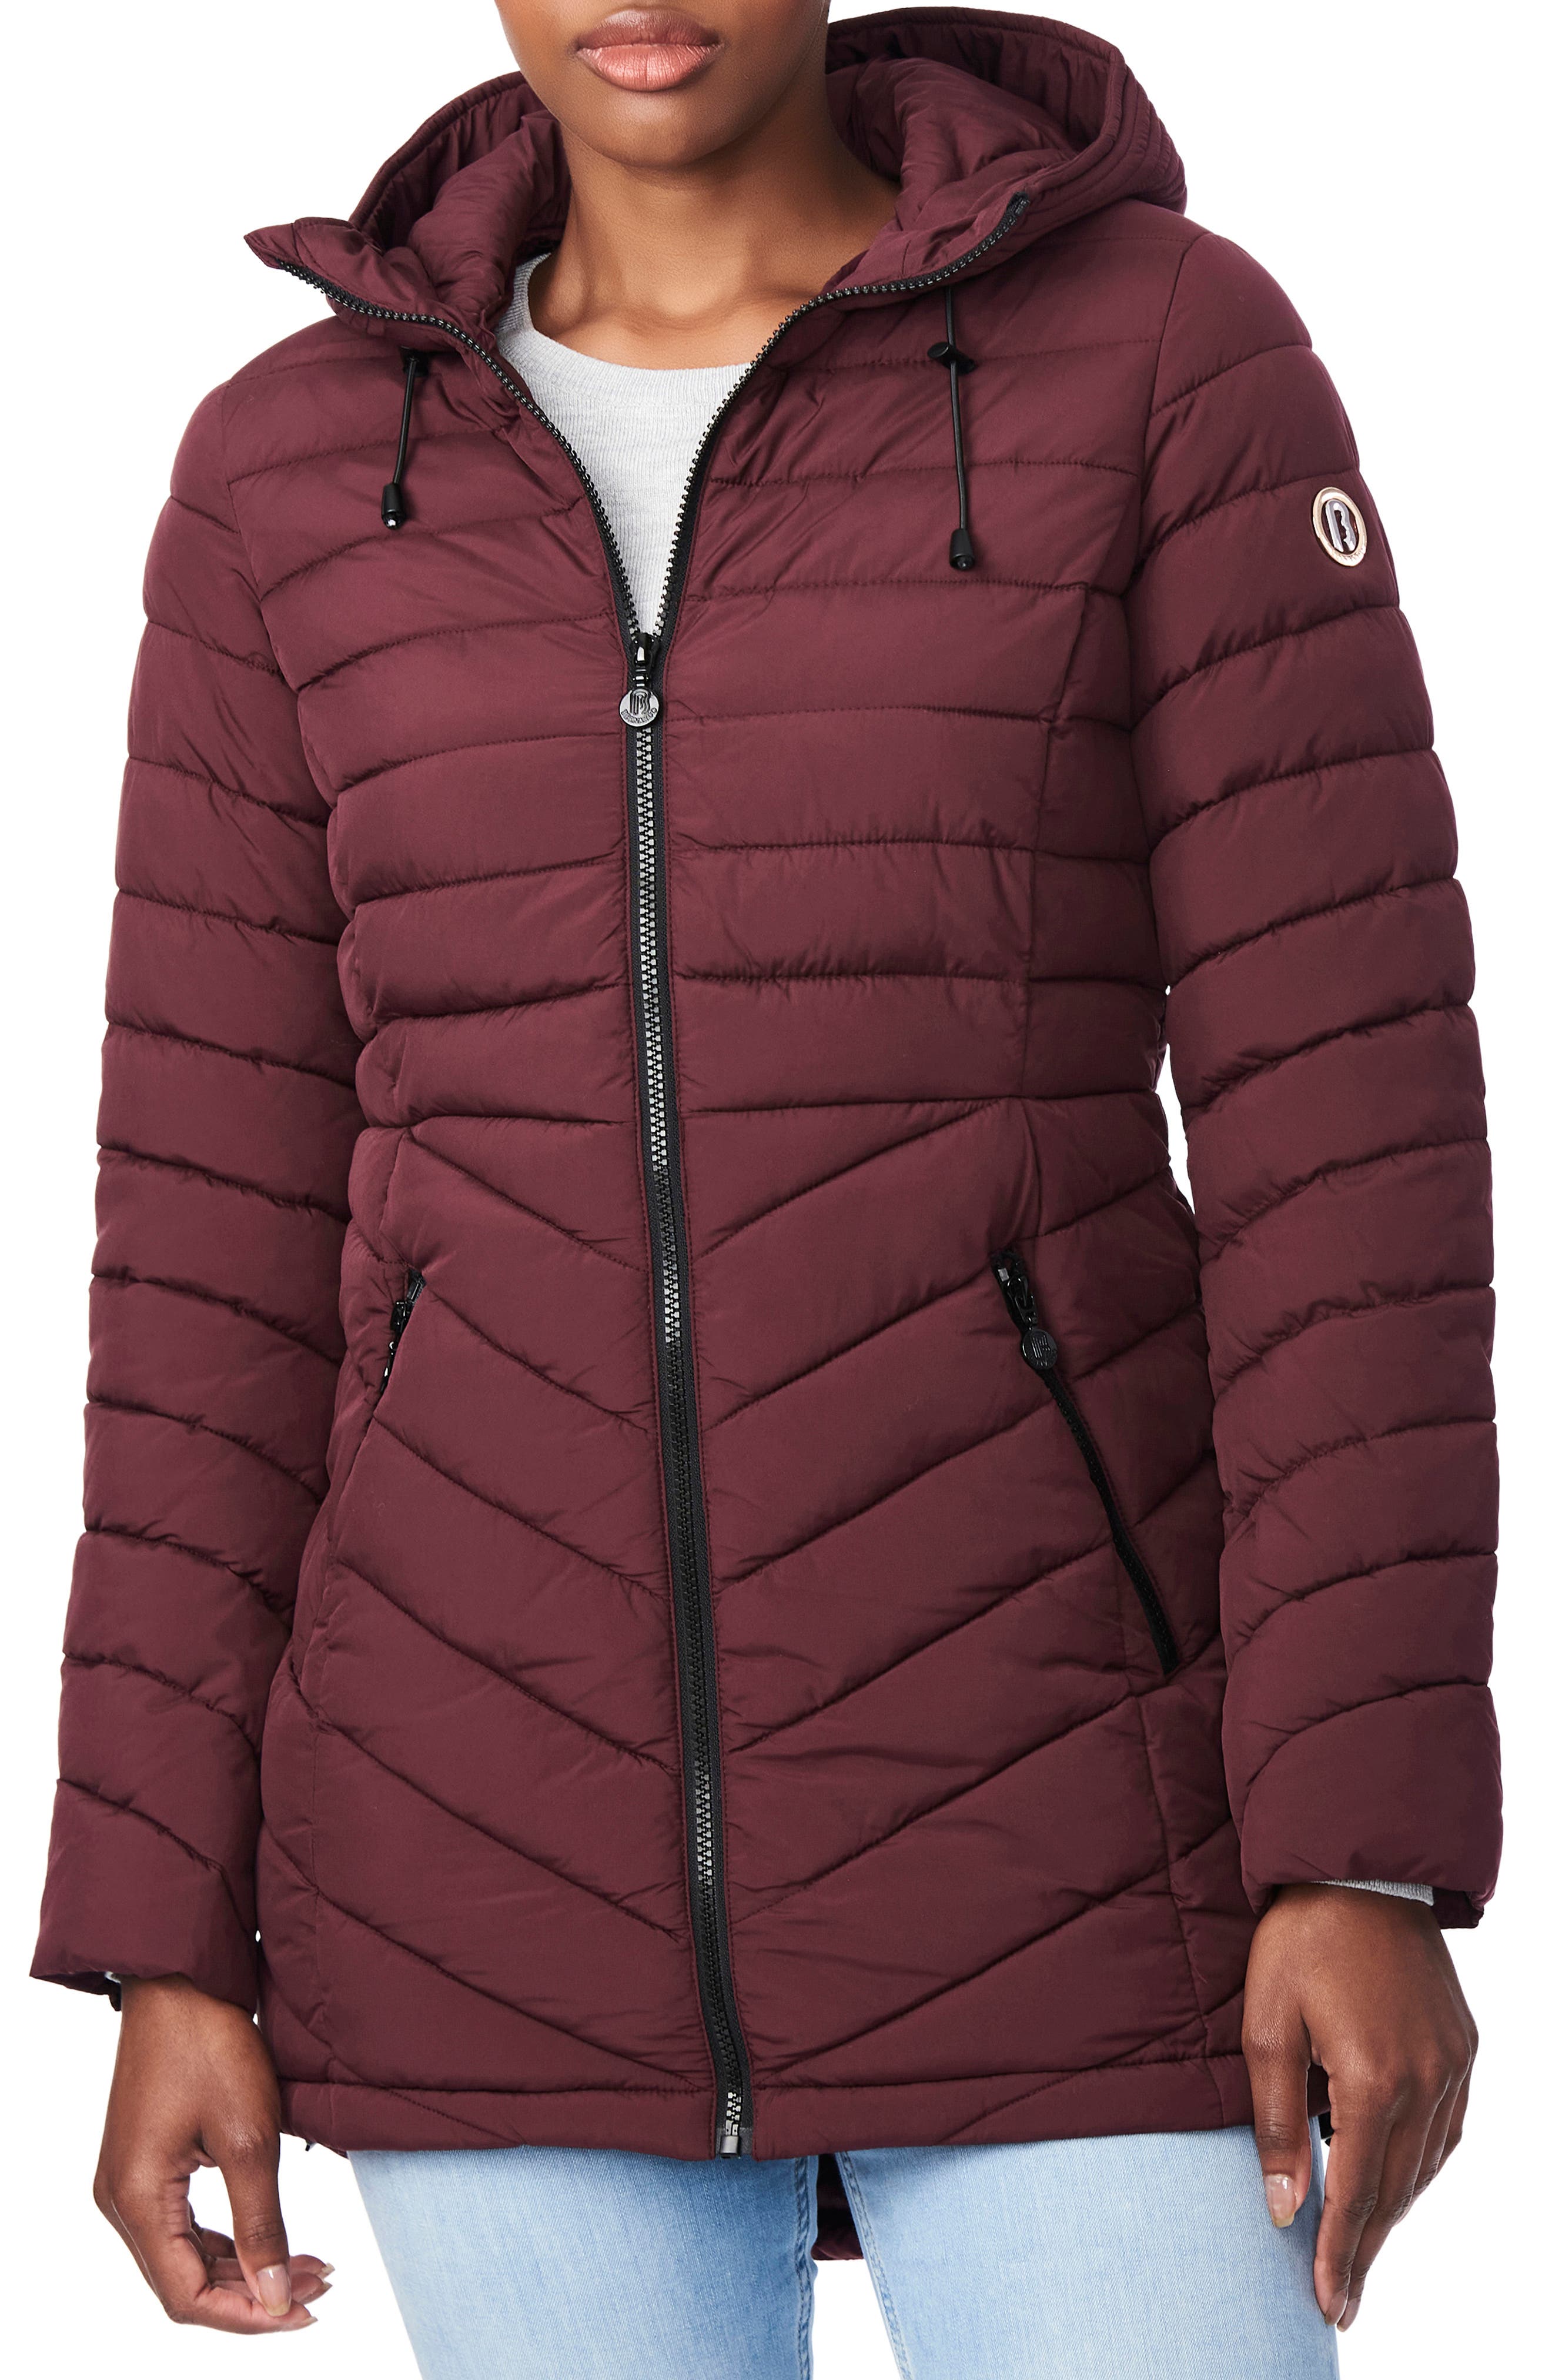 Shop NORDSTROM.com Womens Quilted Jacket on DailyMail